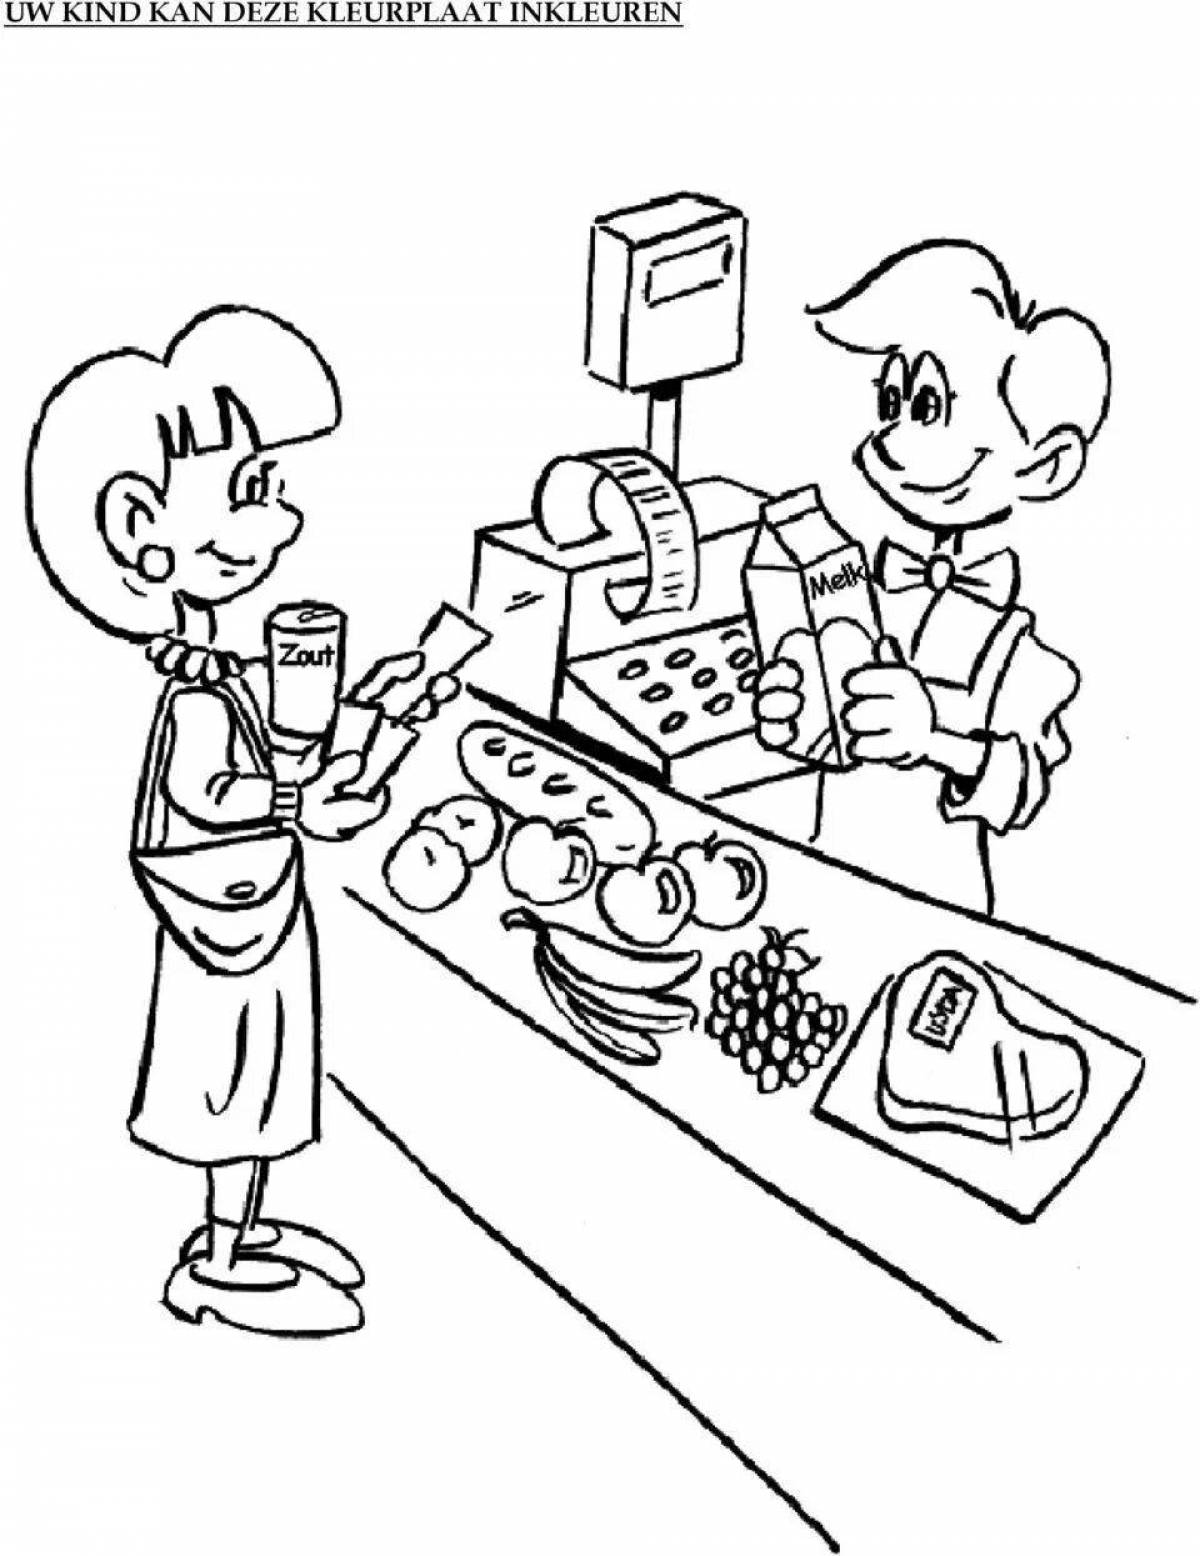 Engaging financial literacy coloring pages for kids